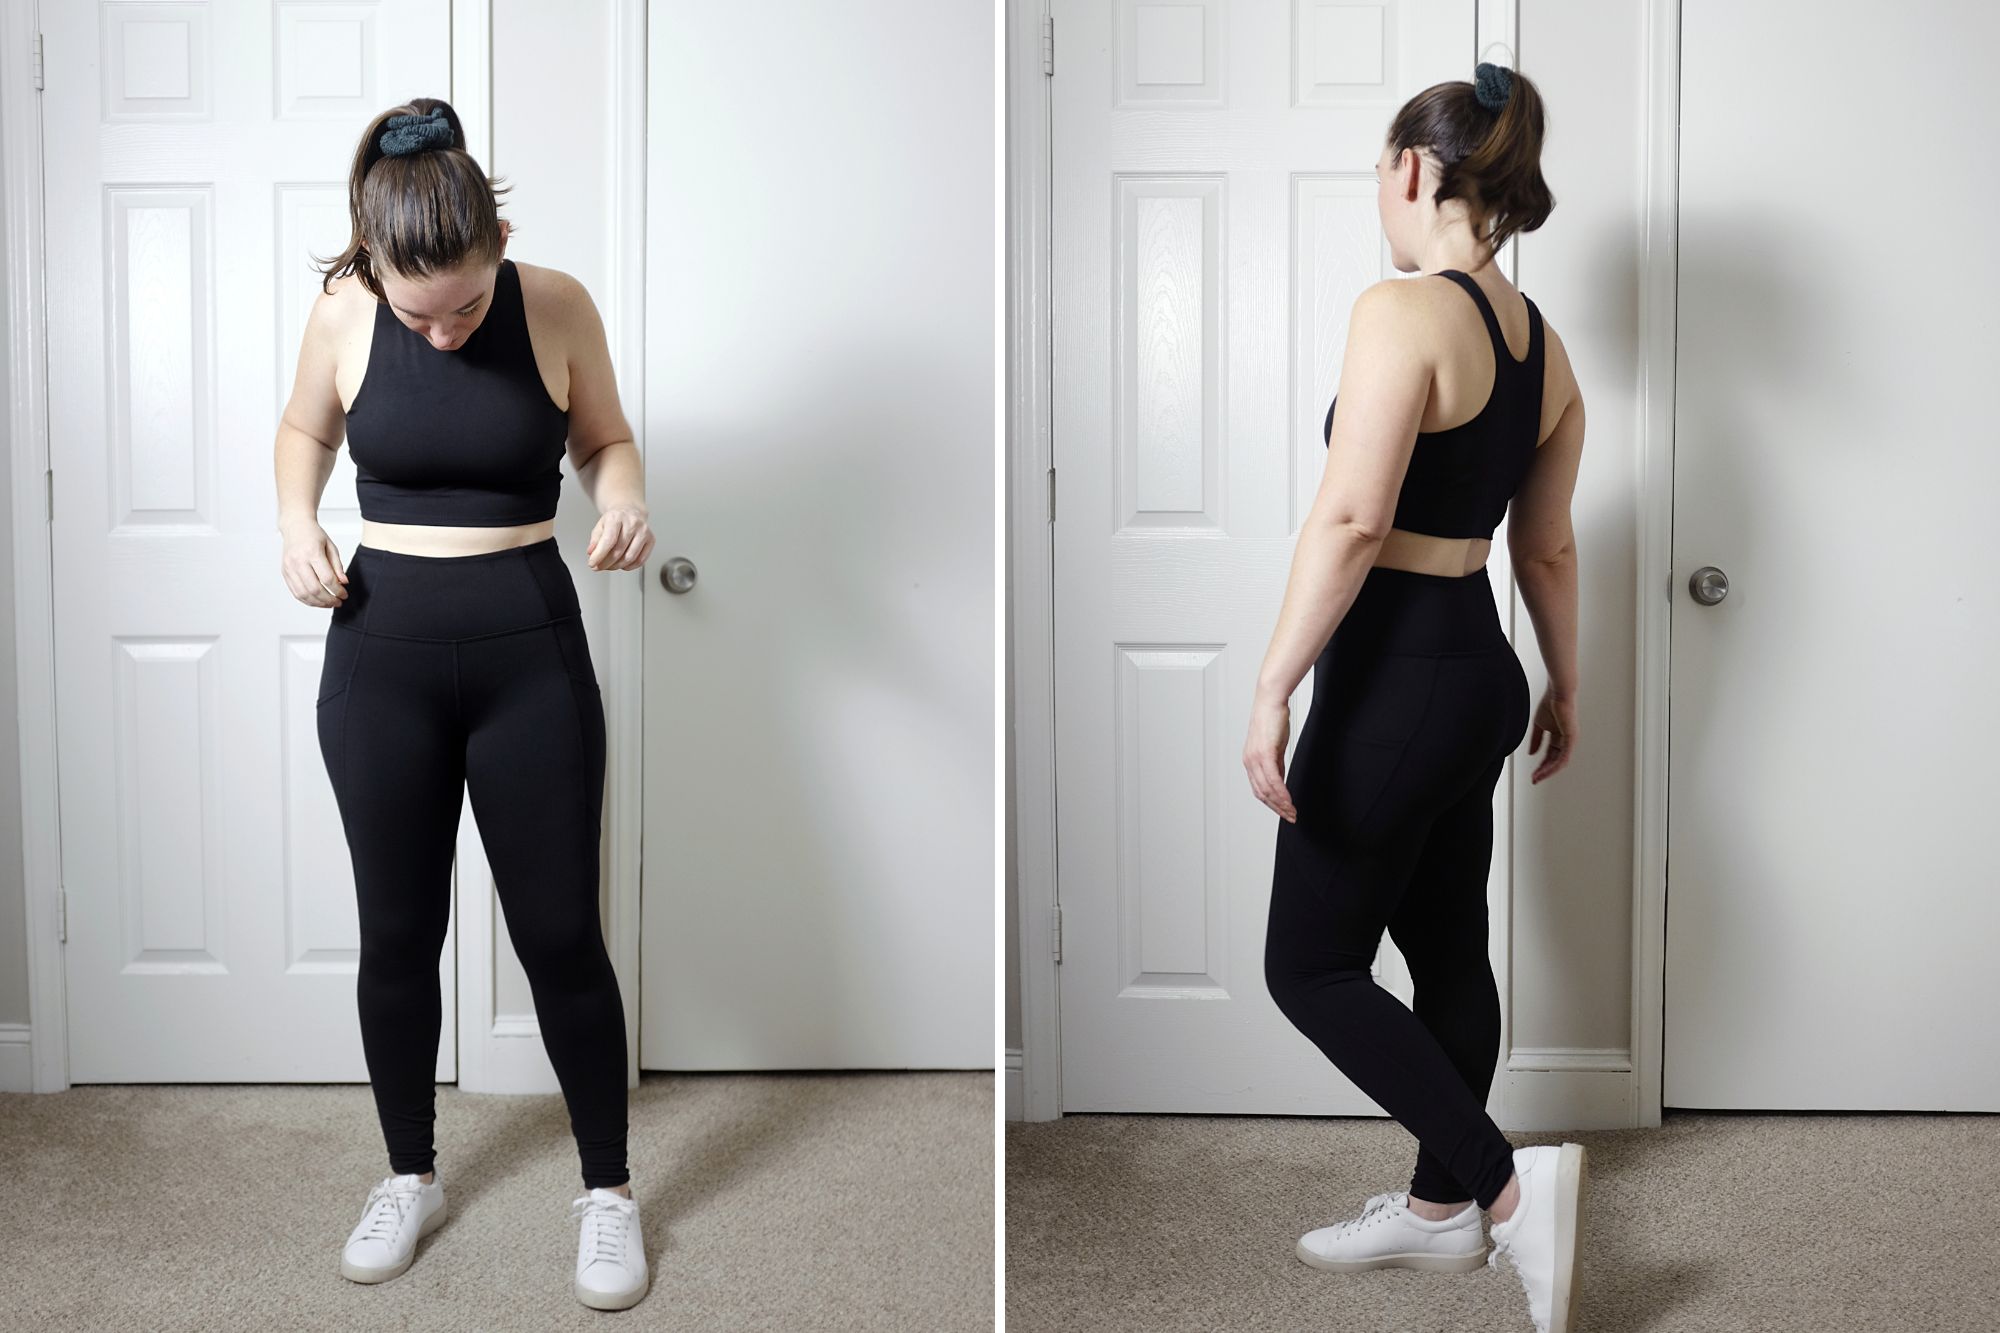 Alyssa wears the Ultra-Soft Performance Pocket Legging in two photos showing how they fit from the front and side